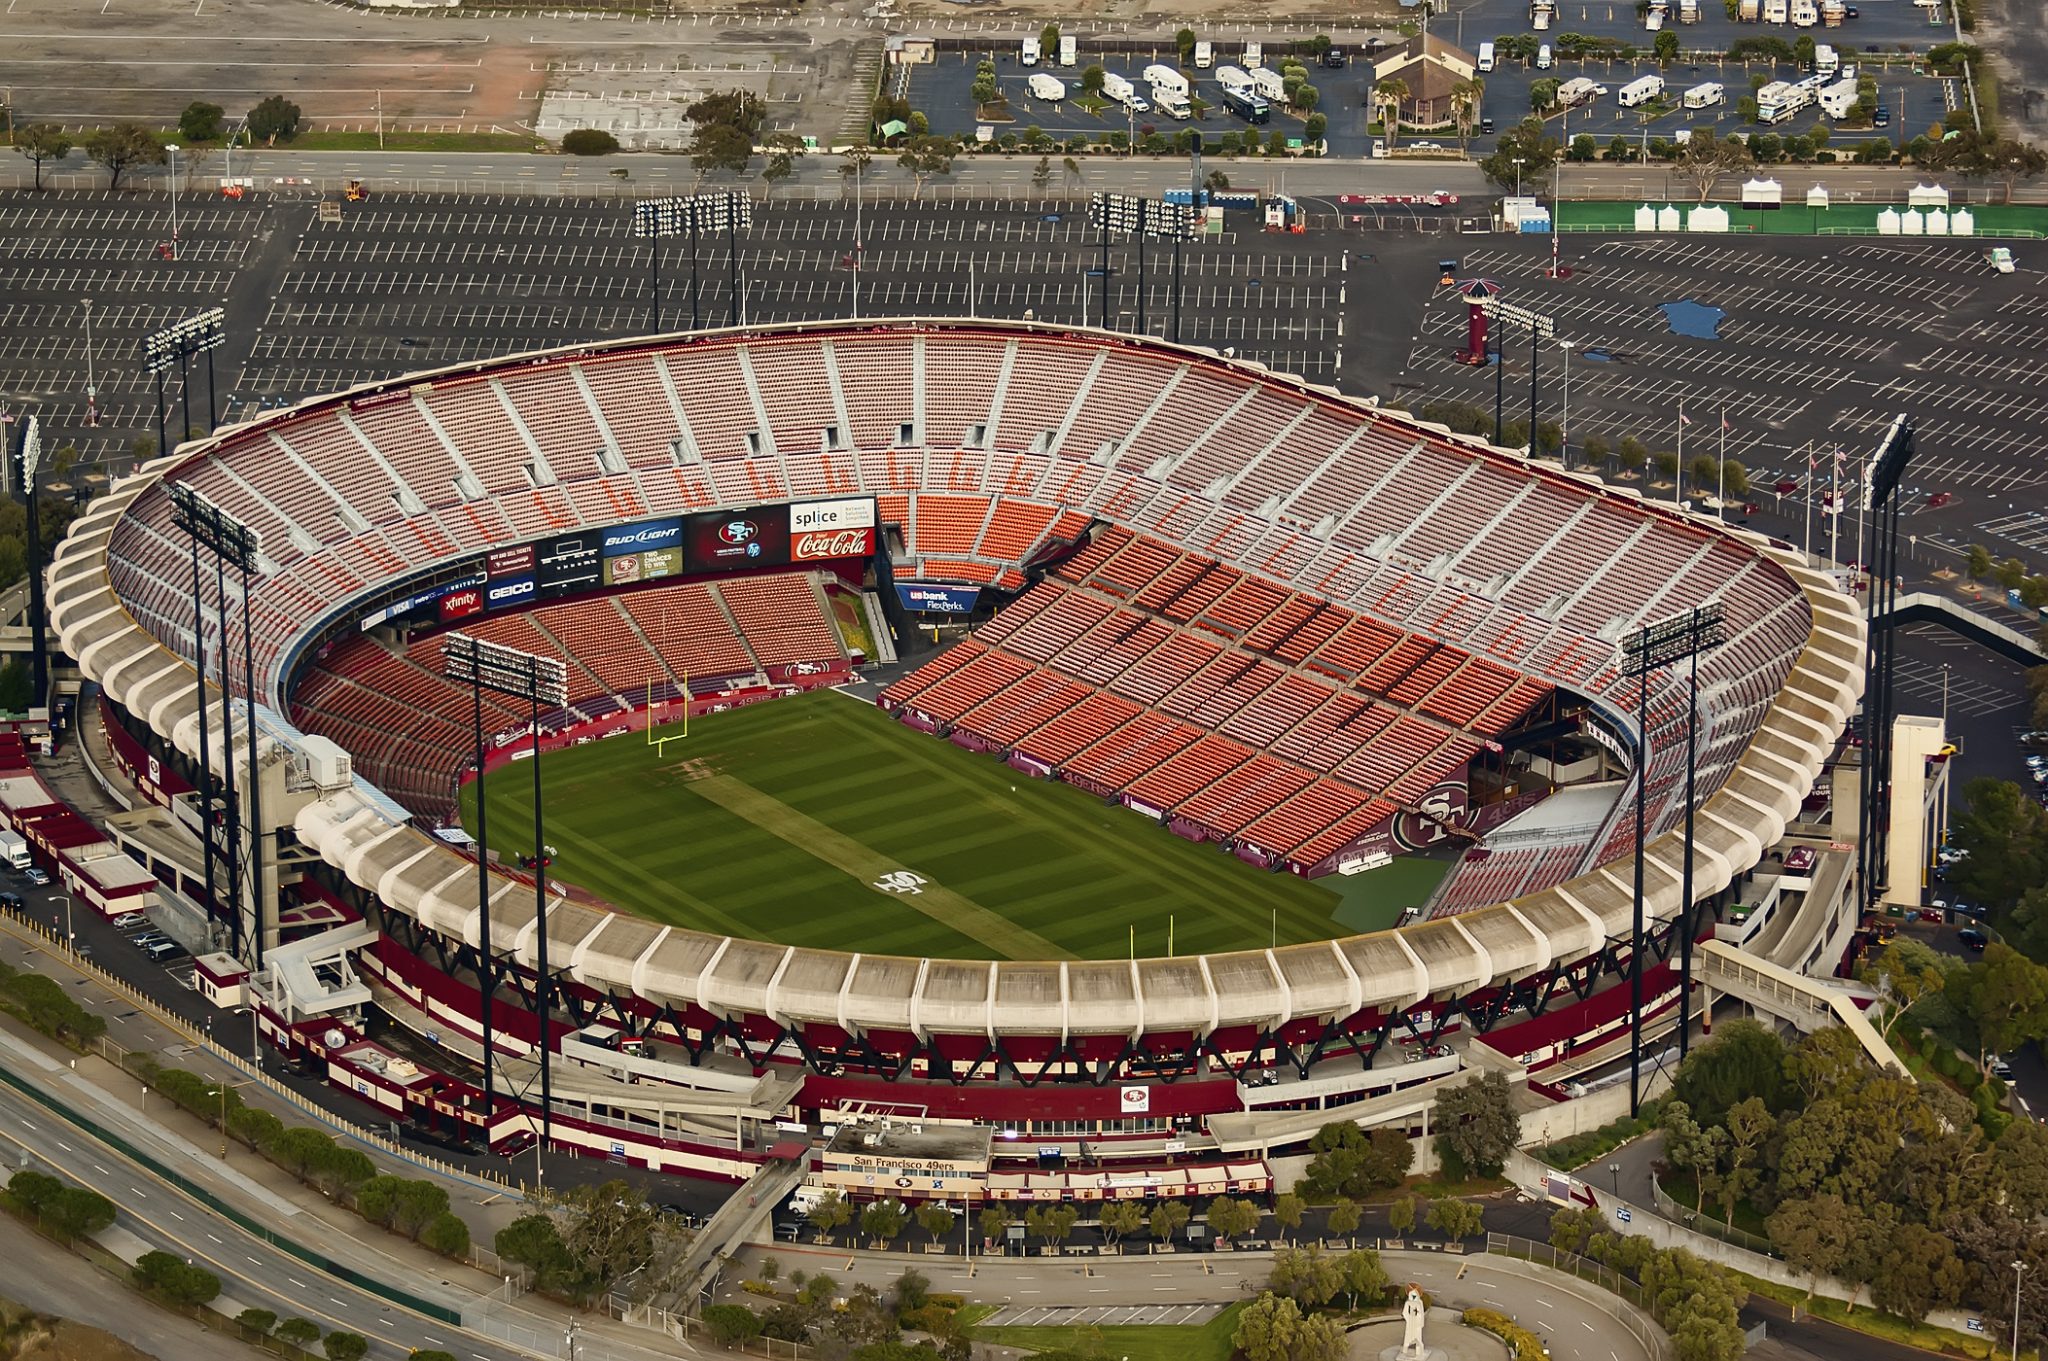 49ers Greatest Games At Candlestick Park - LAFB Network